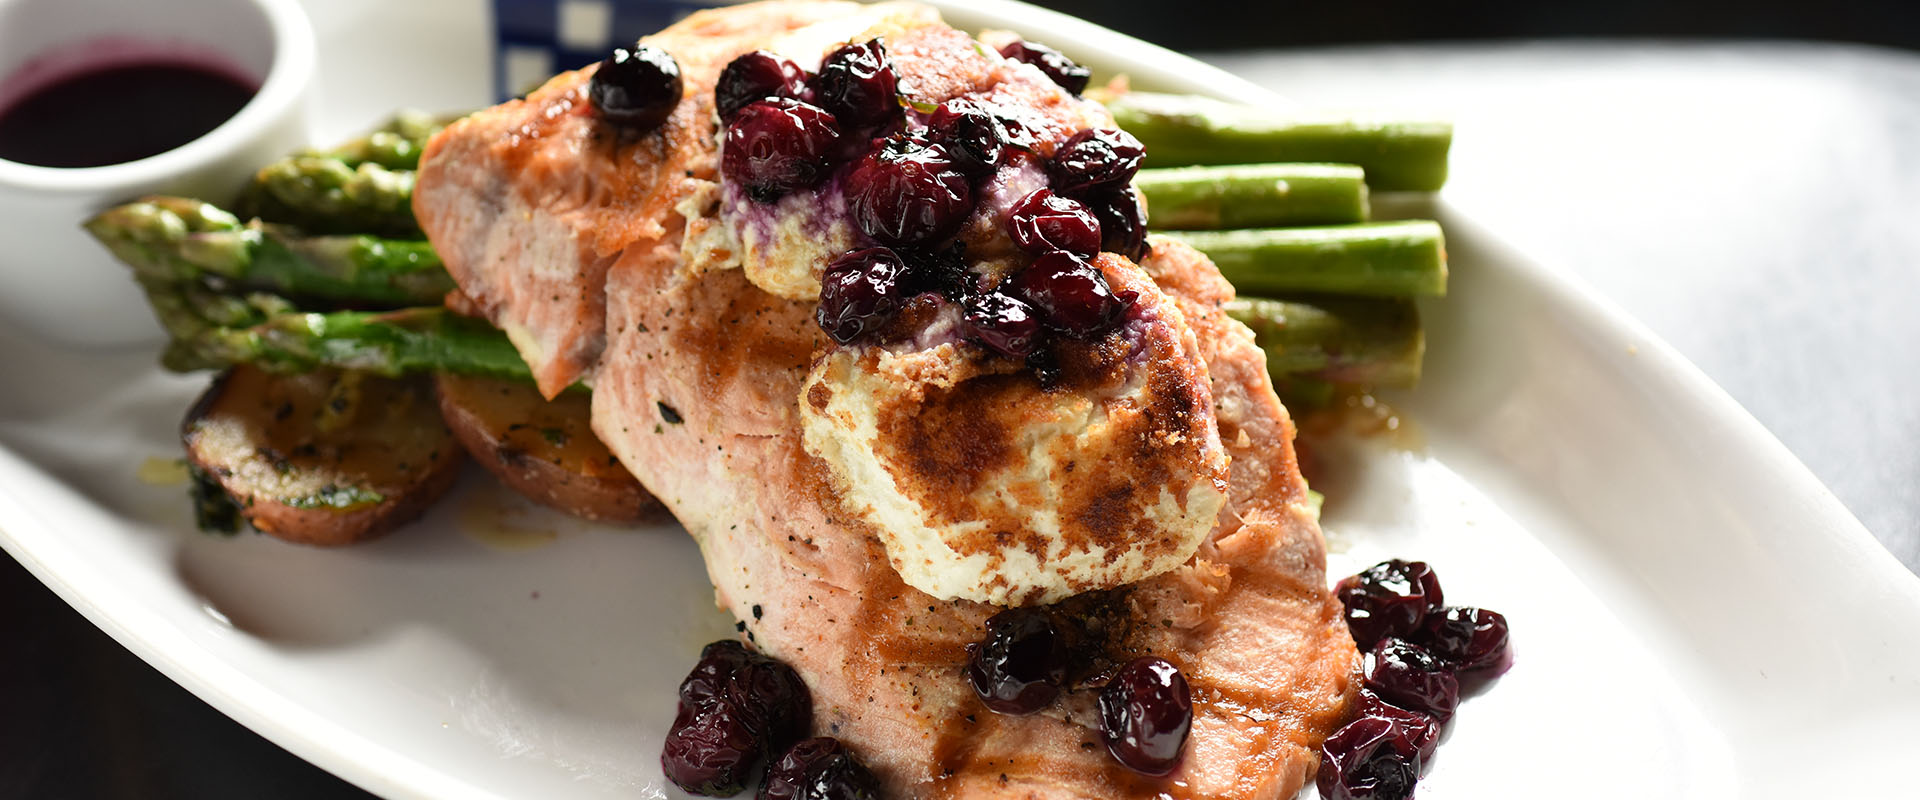 Duke's Seafood Salmon with Cherries and Asparagus